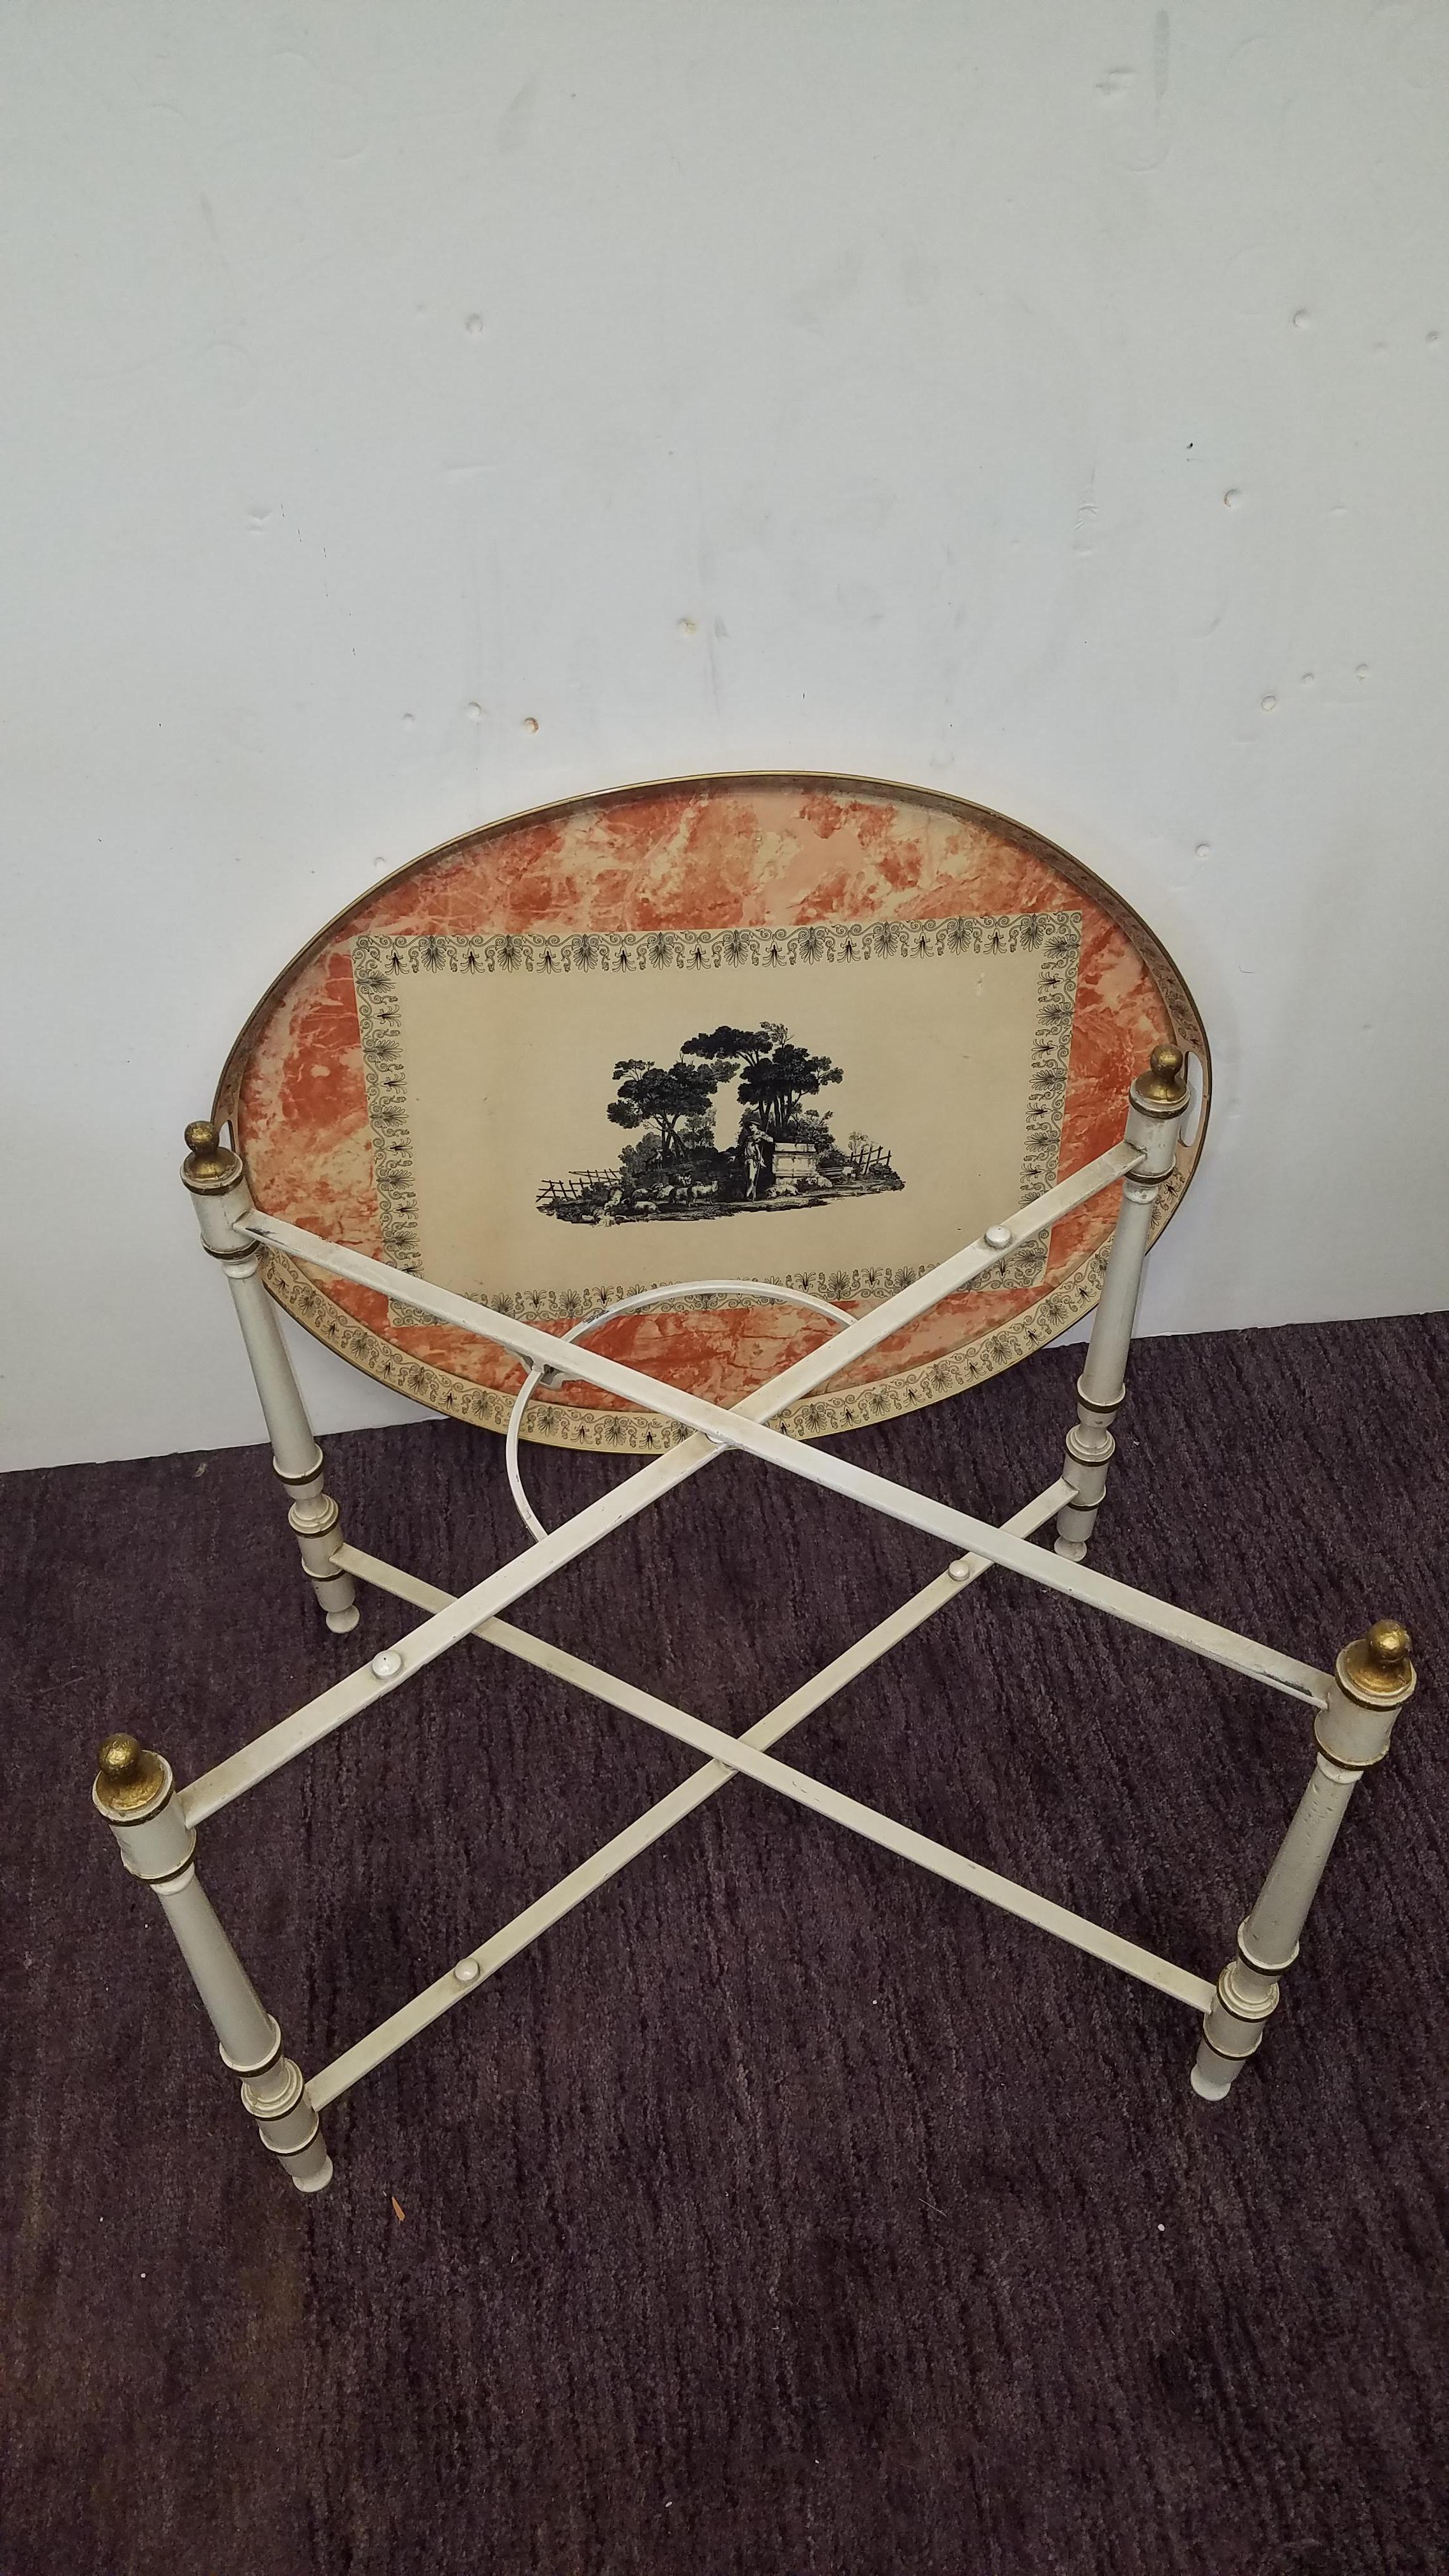 Vintage Mid 20th Century tole painted tray table with foldable base. The ivory background with black neoclassical decoration set on a marbleized surface. The base can be folded for flat storage.